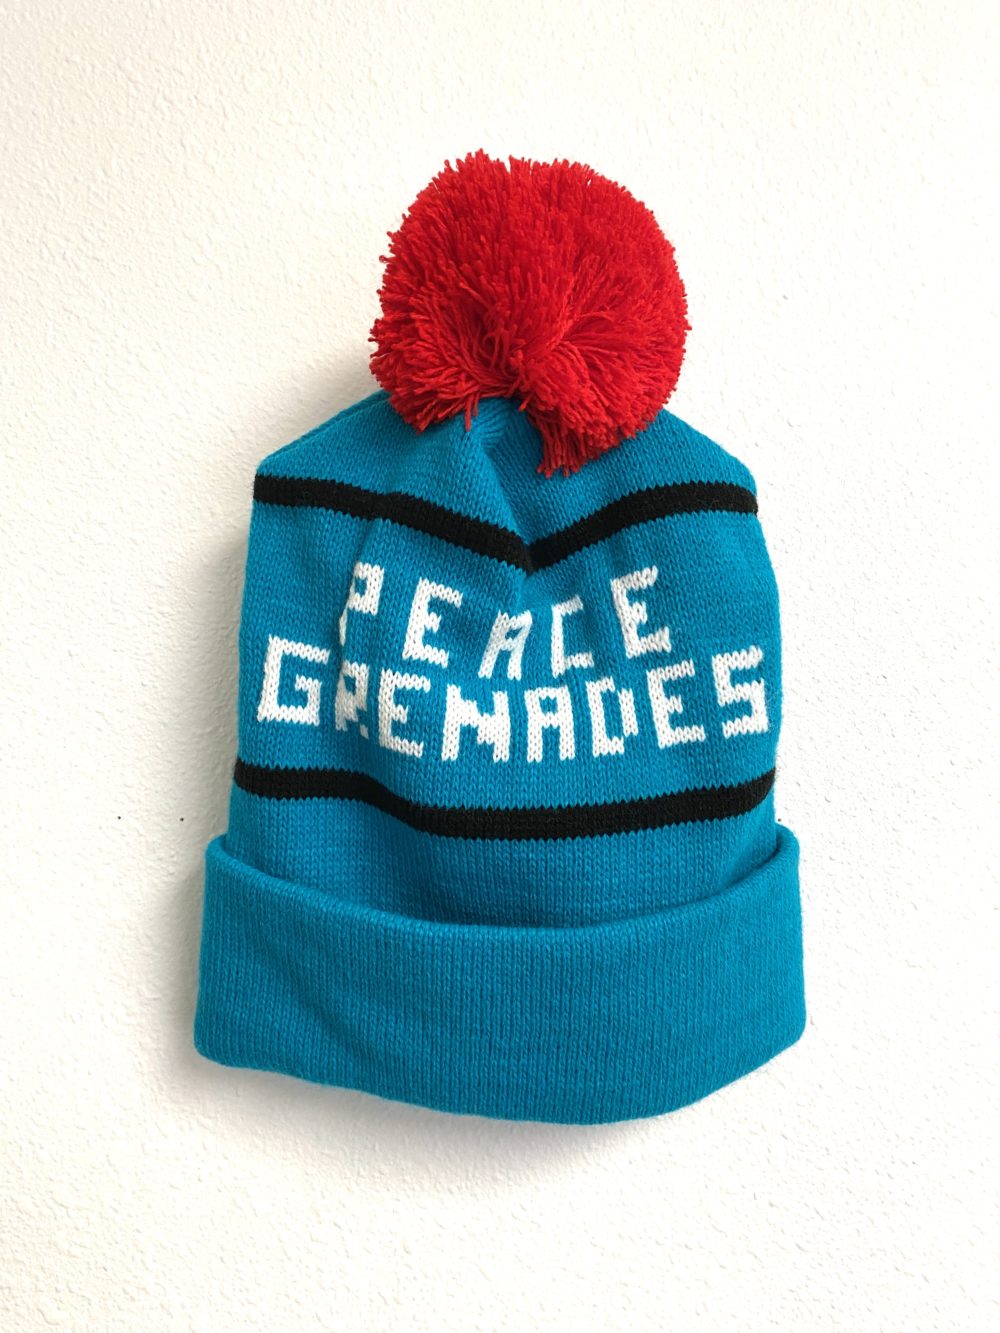 TEAL AND RED POM BEANIE